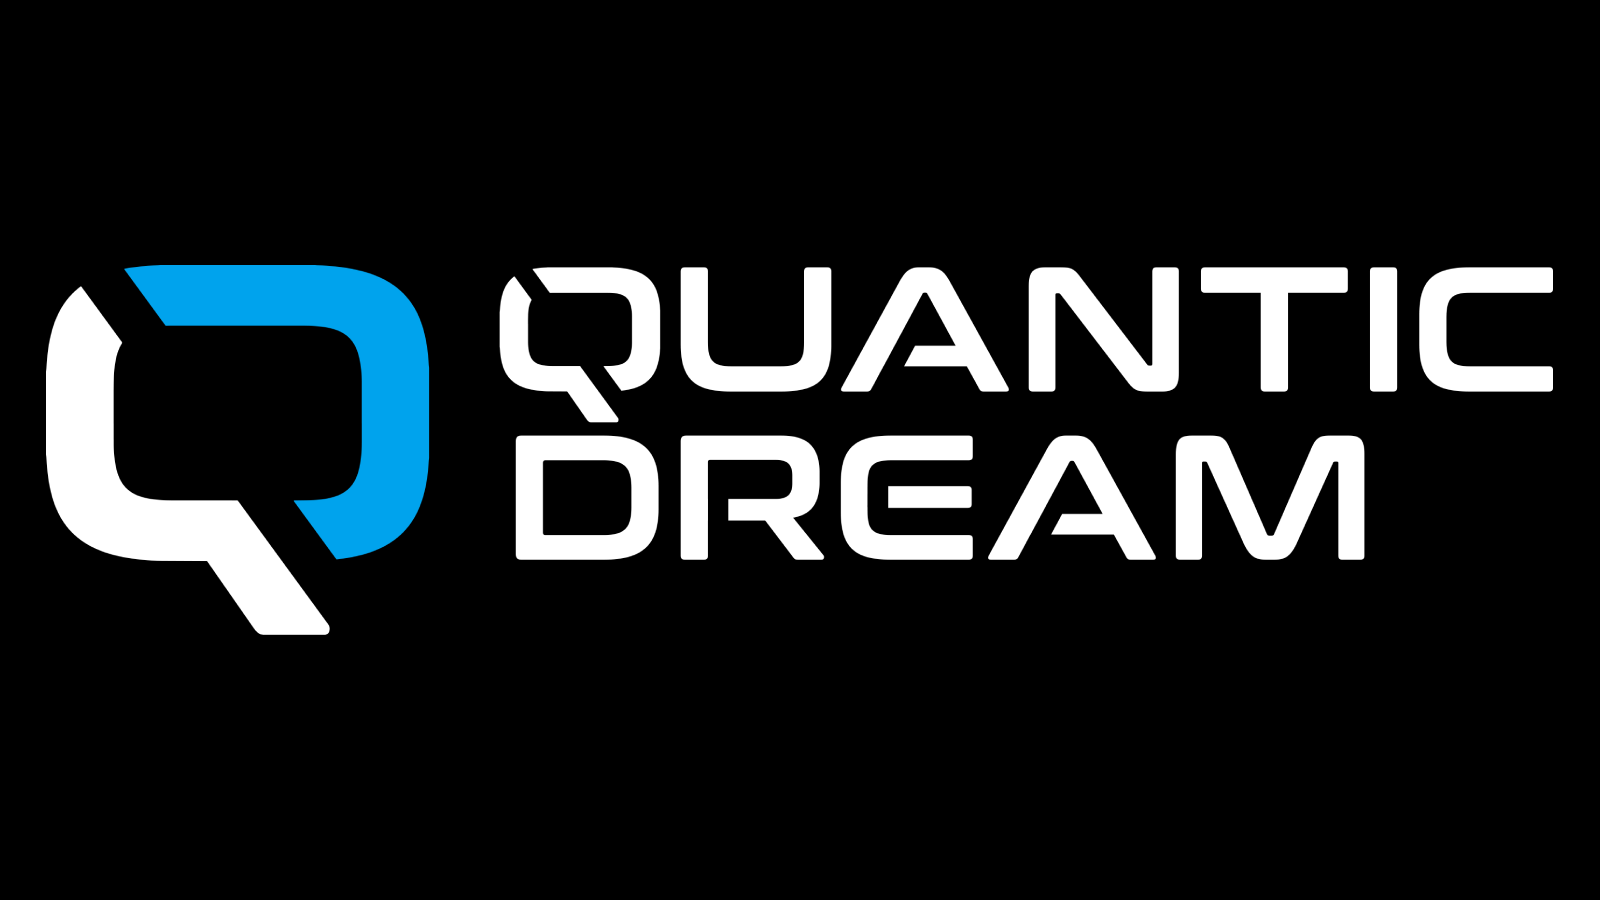 David Cage defends response to allegations of unhealthy studio culture at Quantic Dream Eurogamer.net